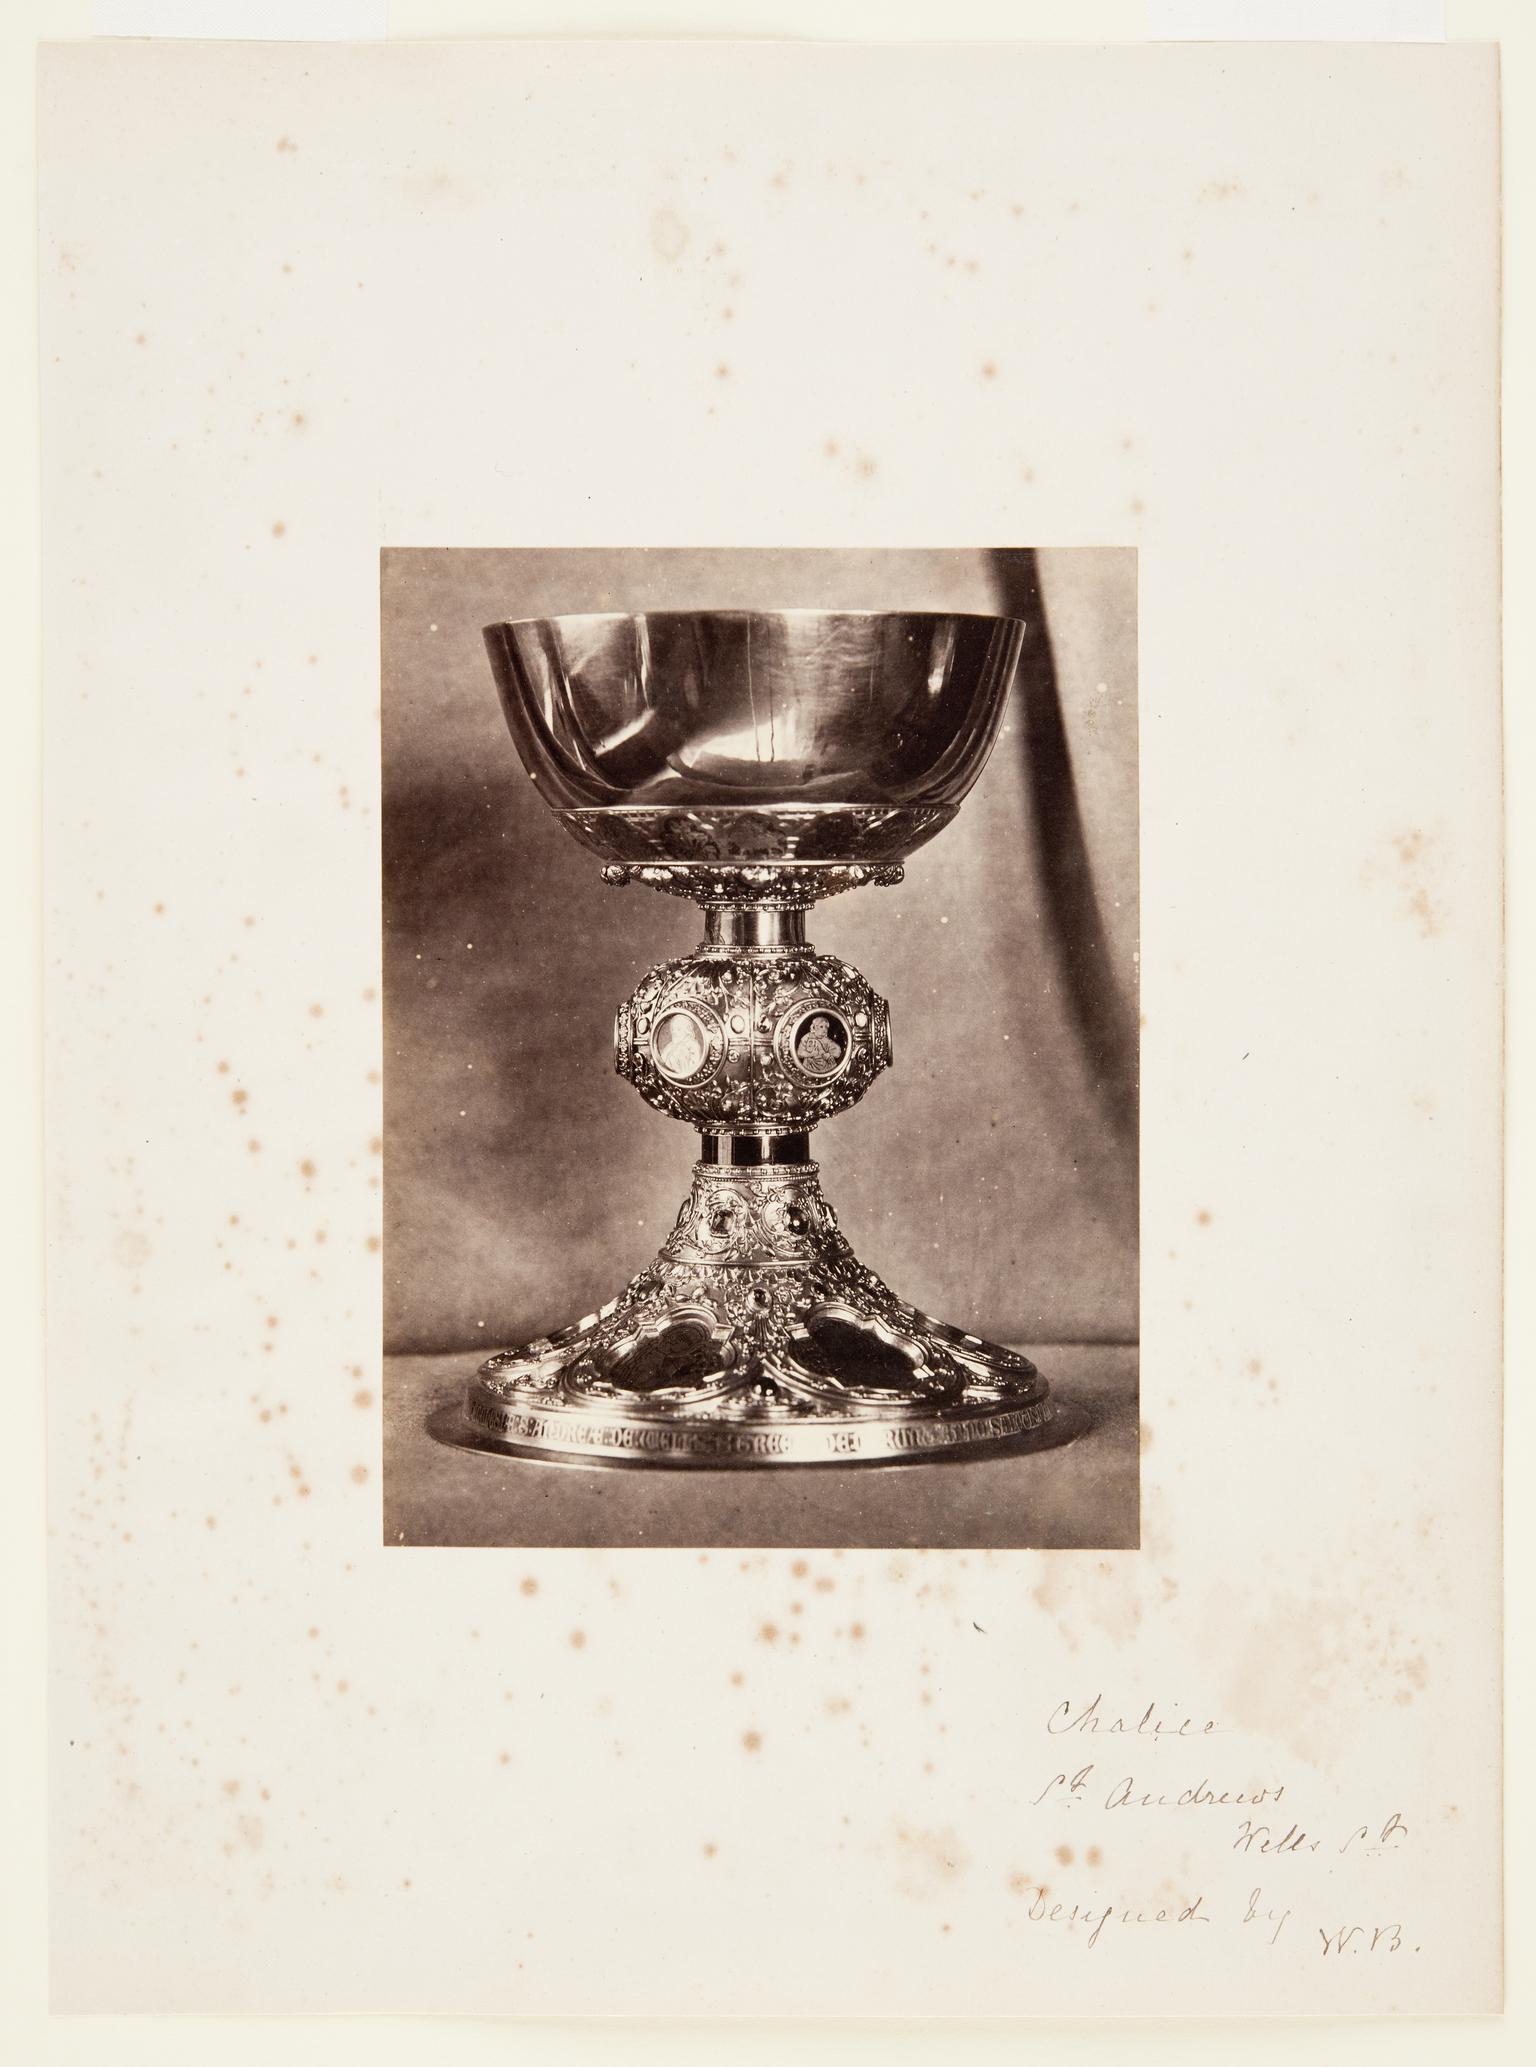 Chalice made for St Andrew's, Well Street